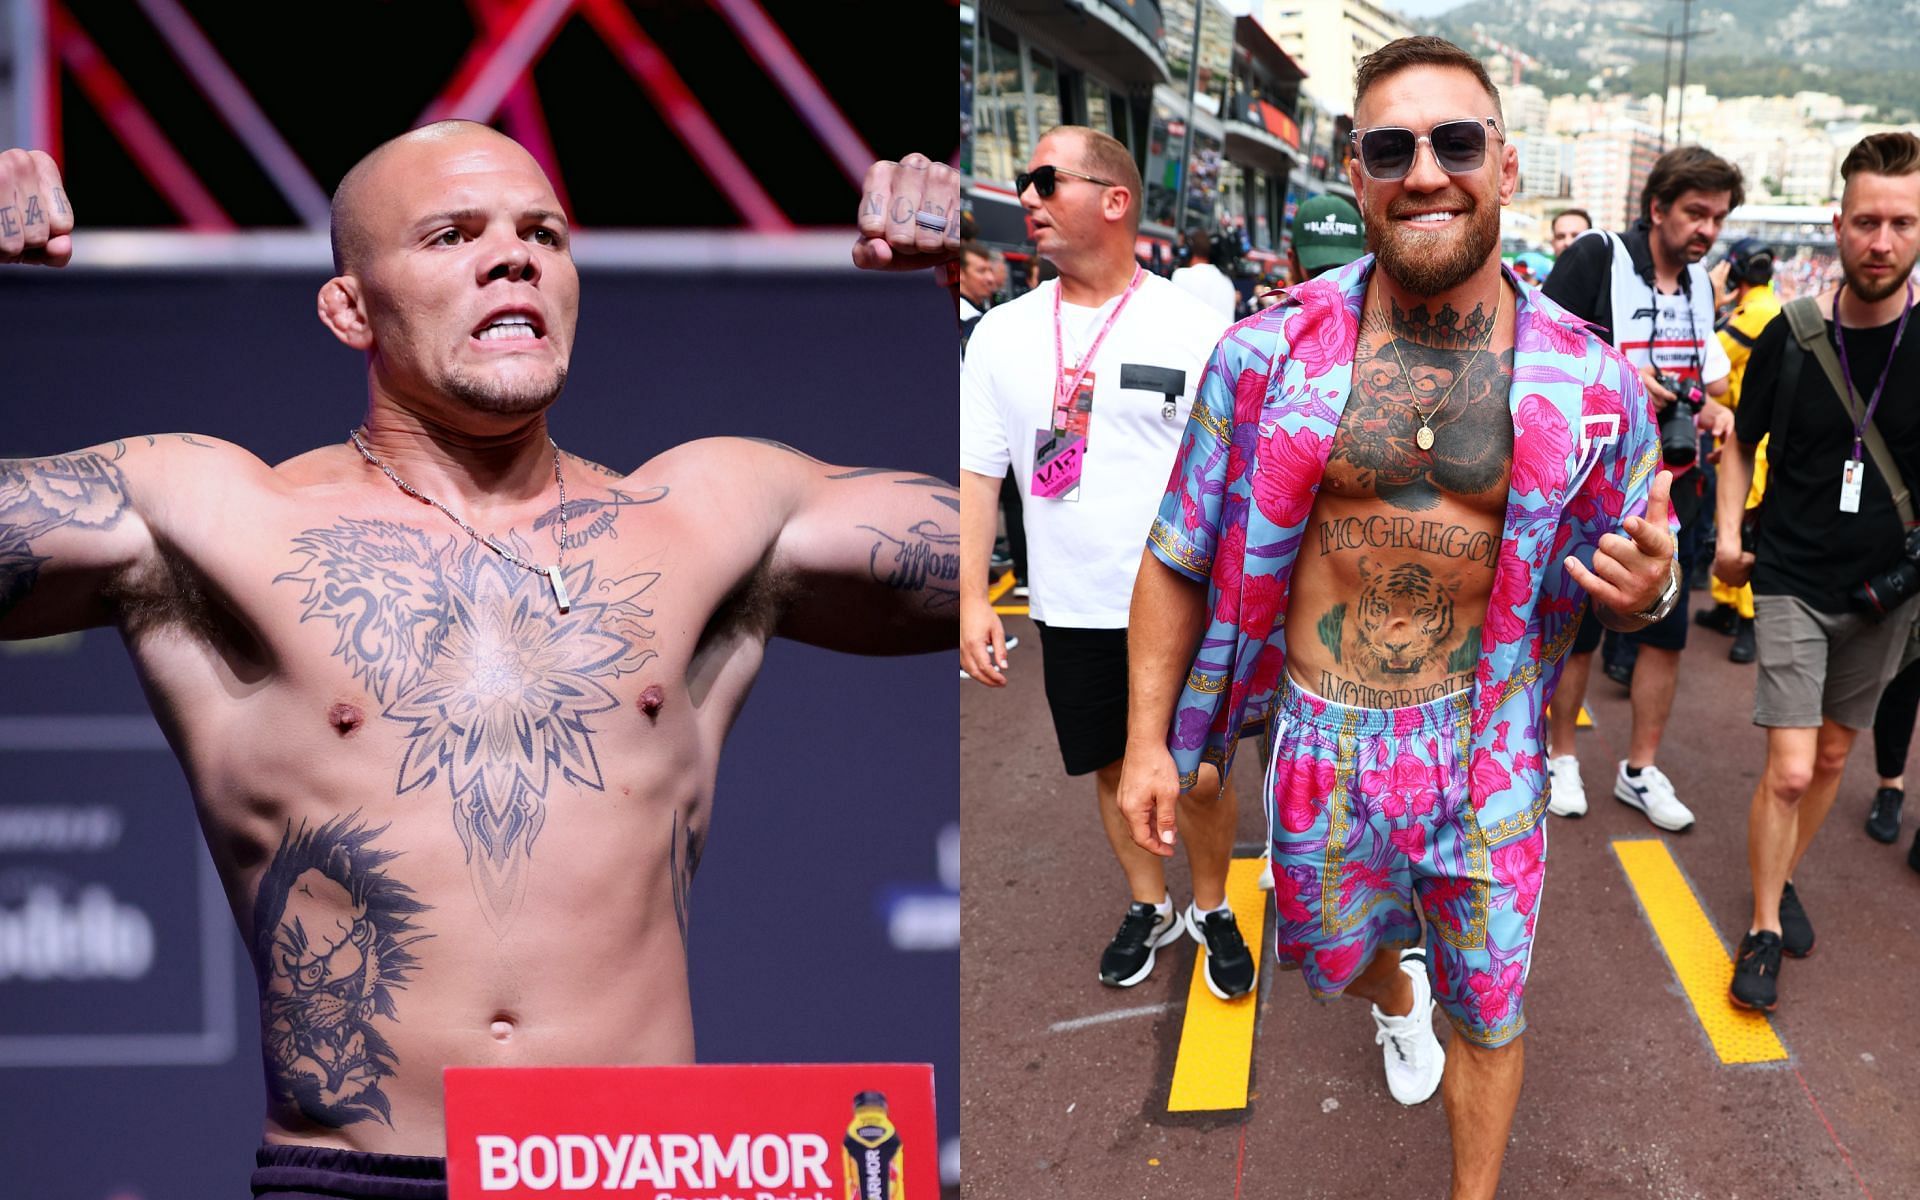 Anthony Smith (left) and Conor McGregor (right) [Image Courtesy: Getty Images]